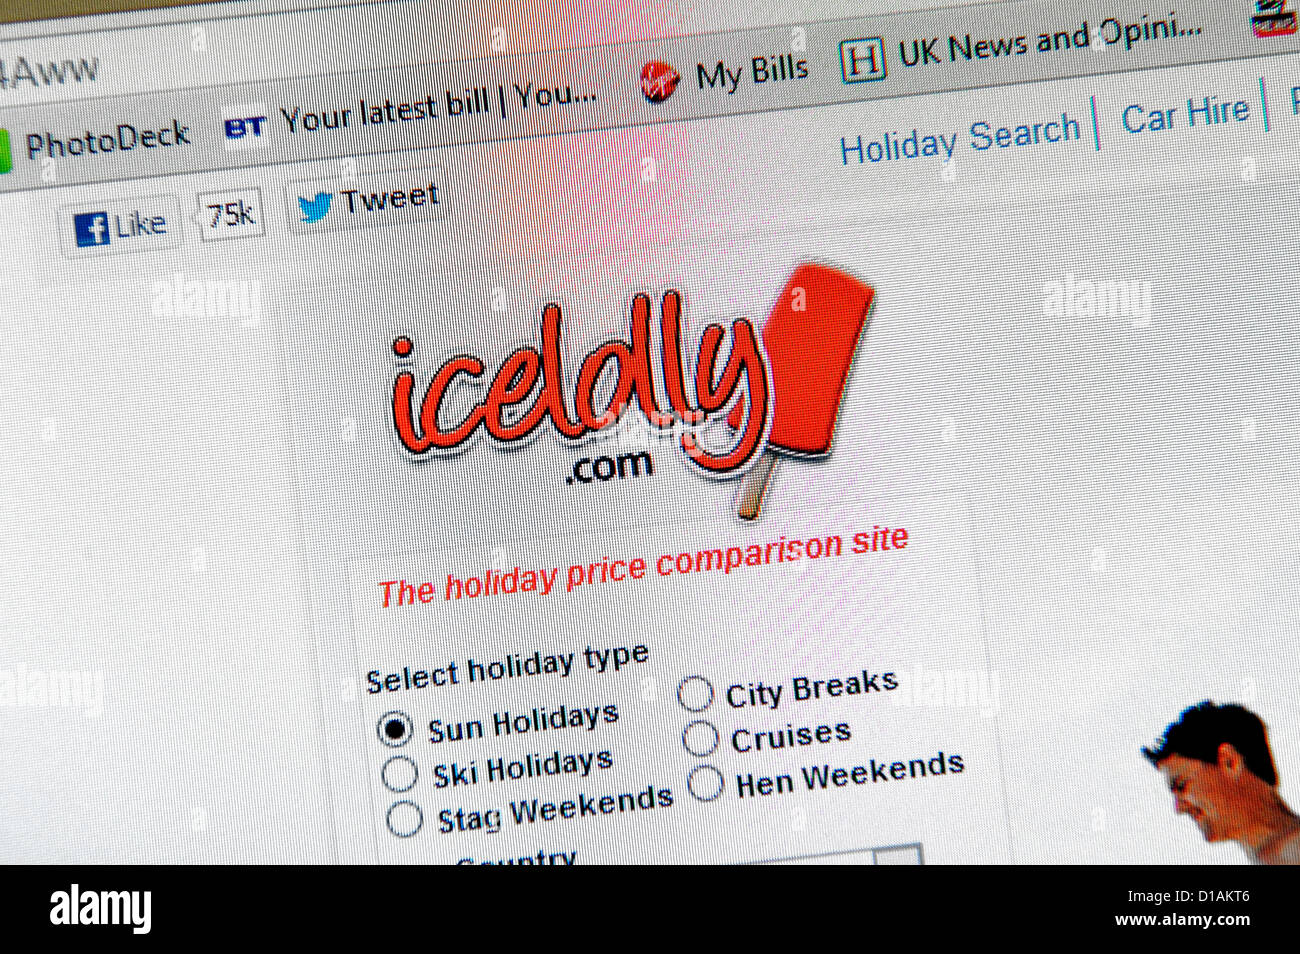 Icelolly.com holiday travel website Foto Stock